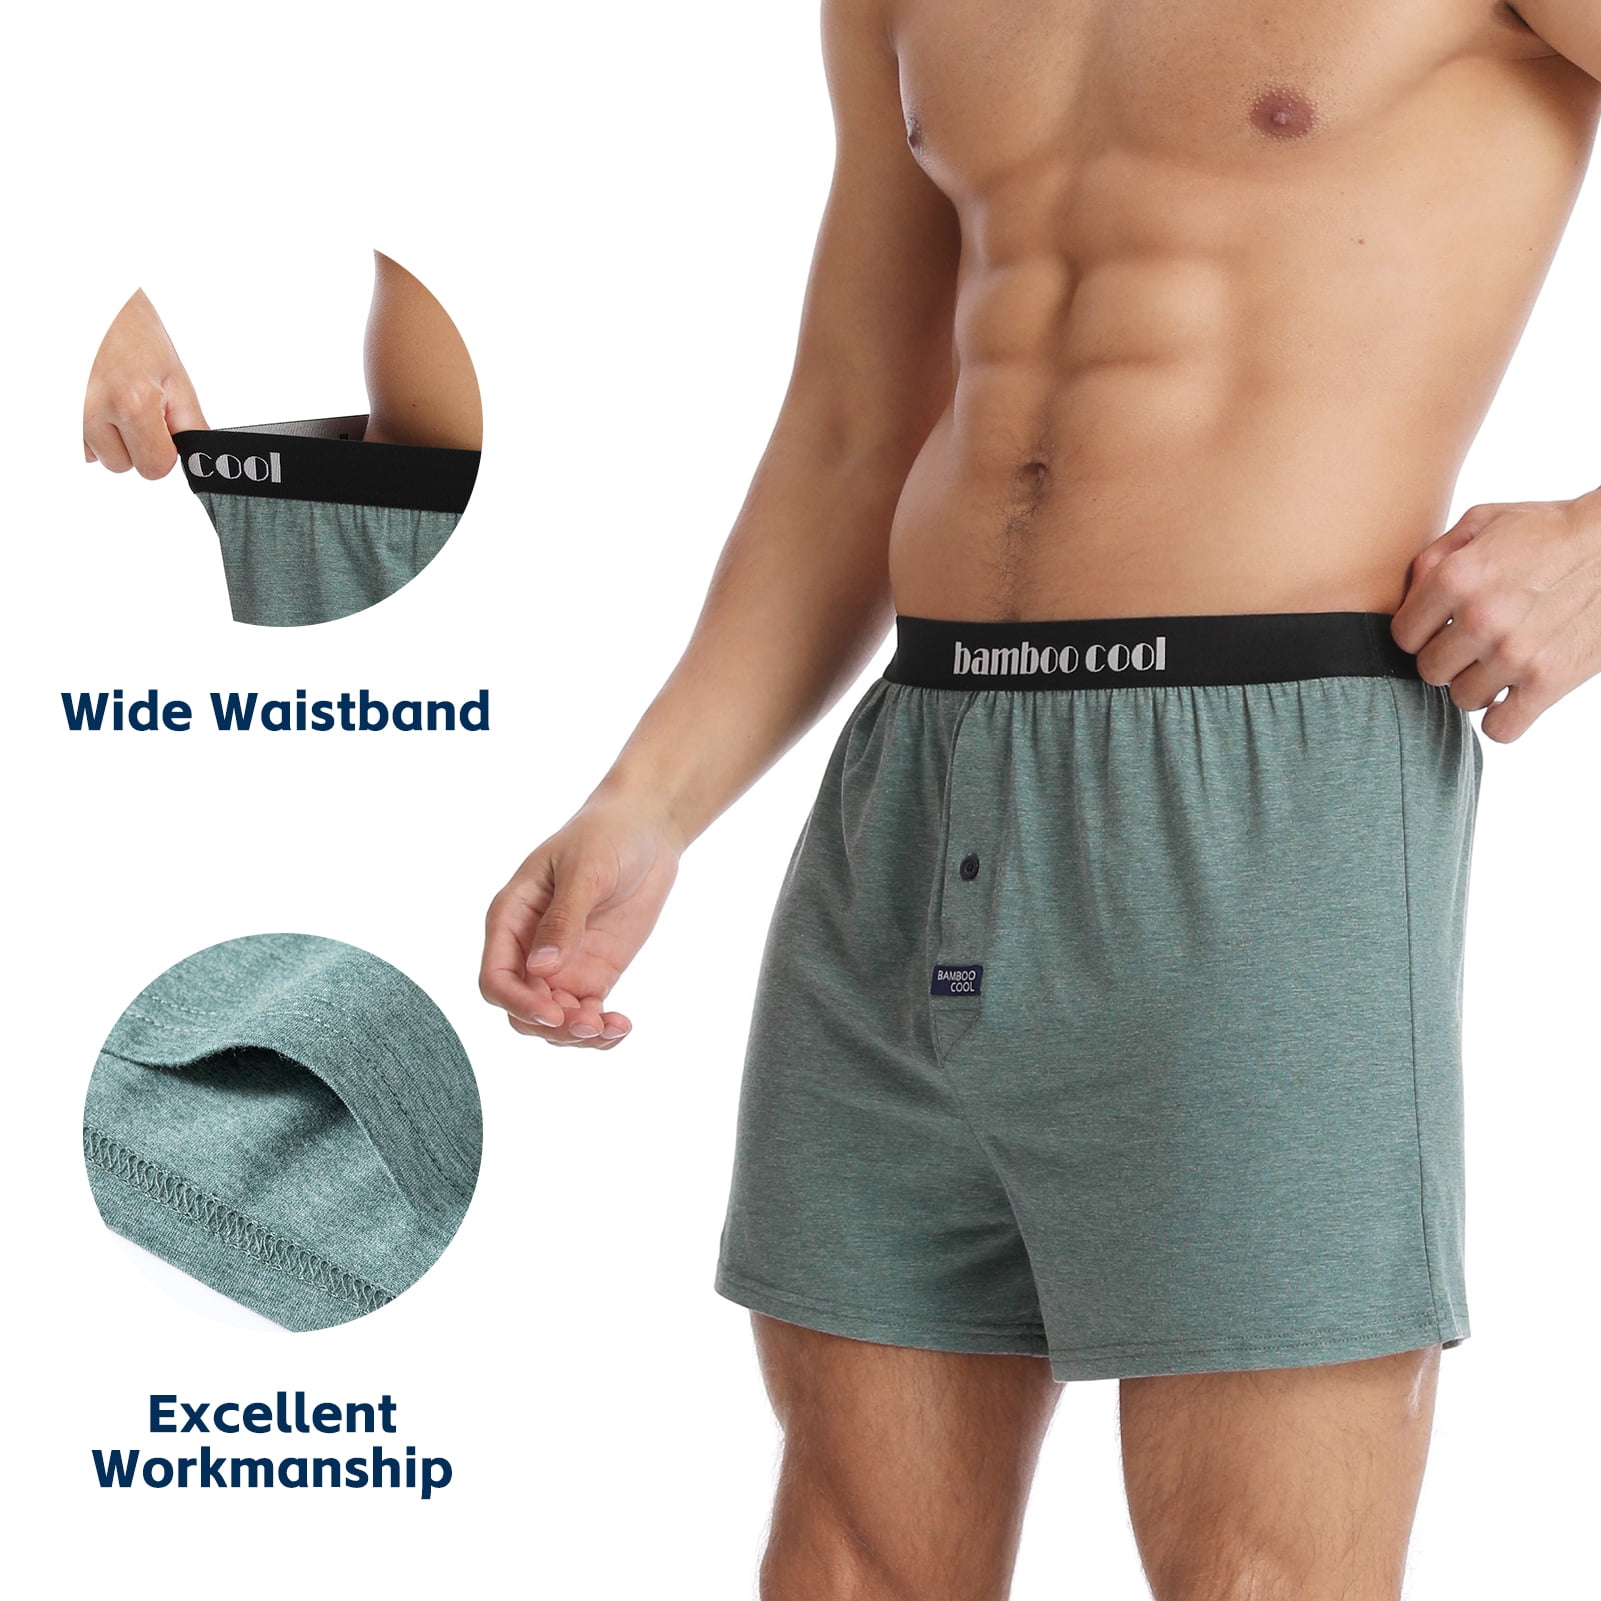 ThermoForm Bamboo Men Shorts Underwear Bamboo natural fiber antibacterial  Hypoallergenic Skinfriendly Breathable dry feeling